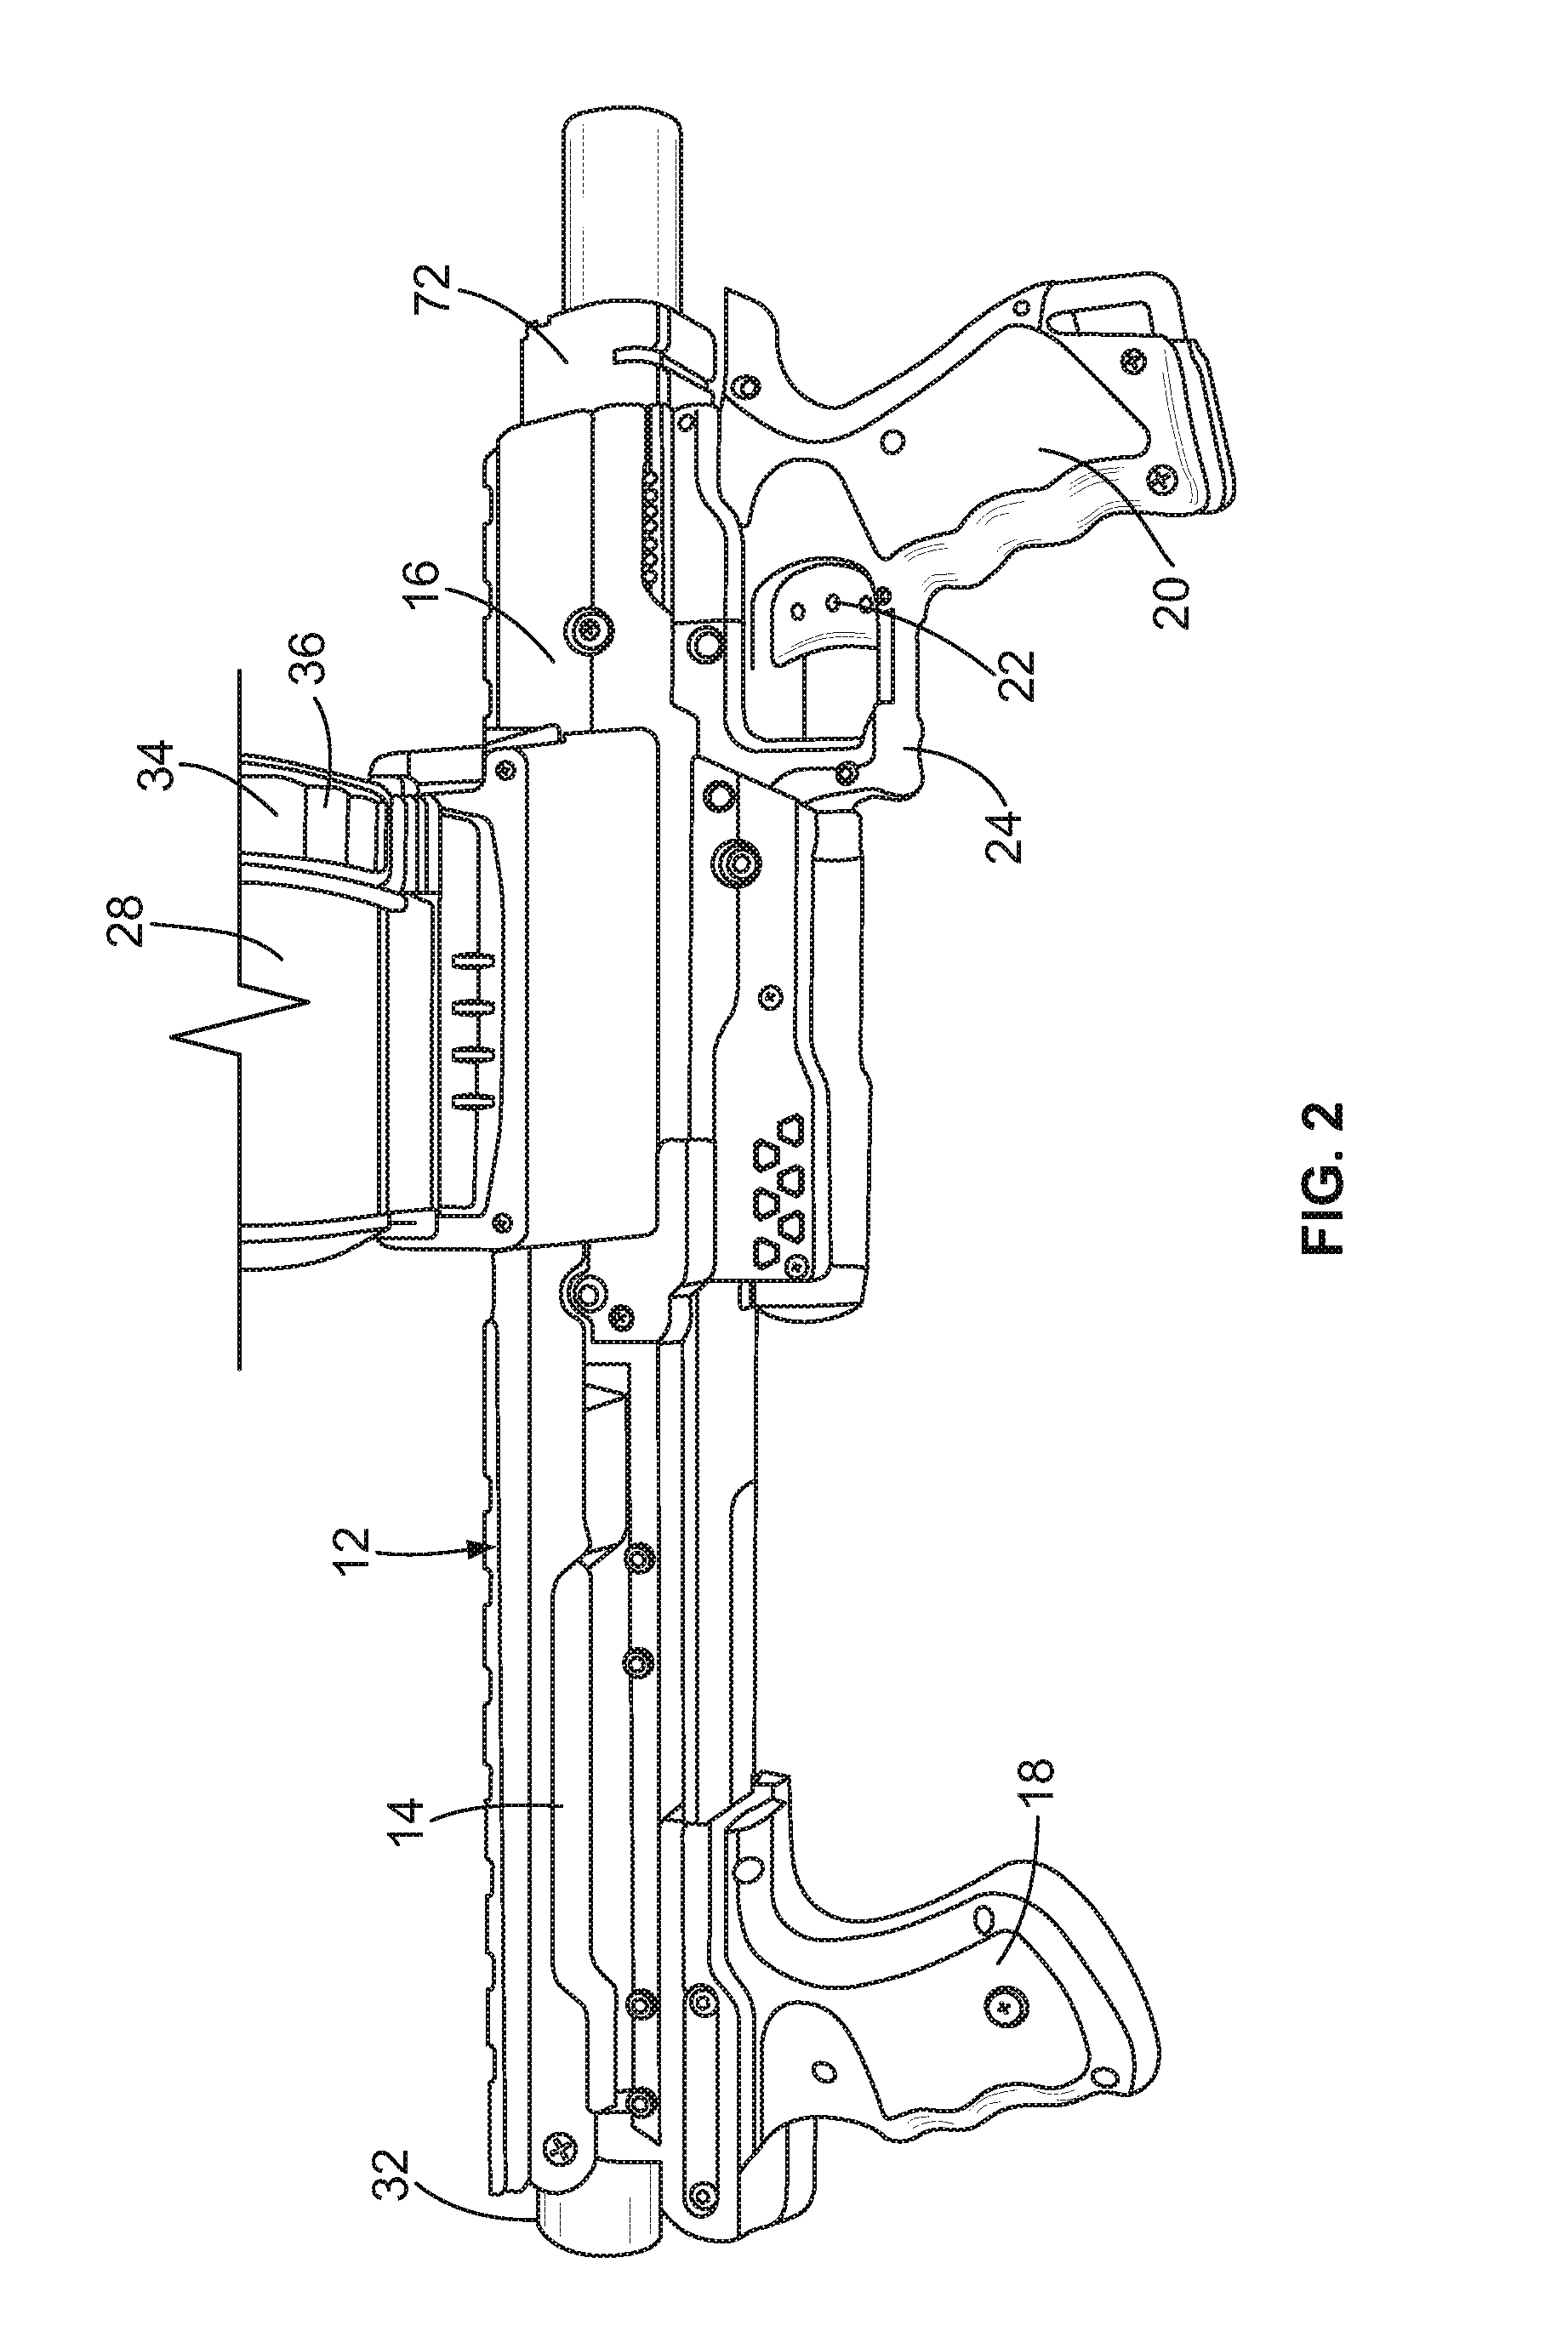 Toy dart launcher apparatus with momentary lock